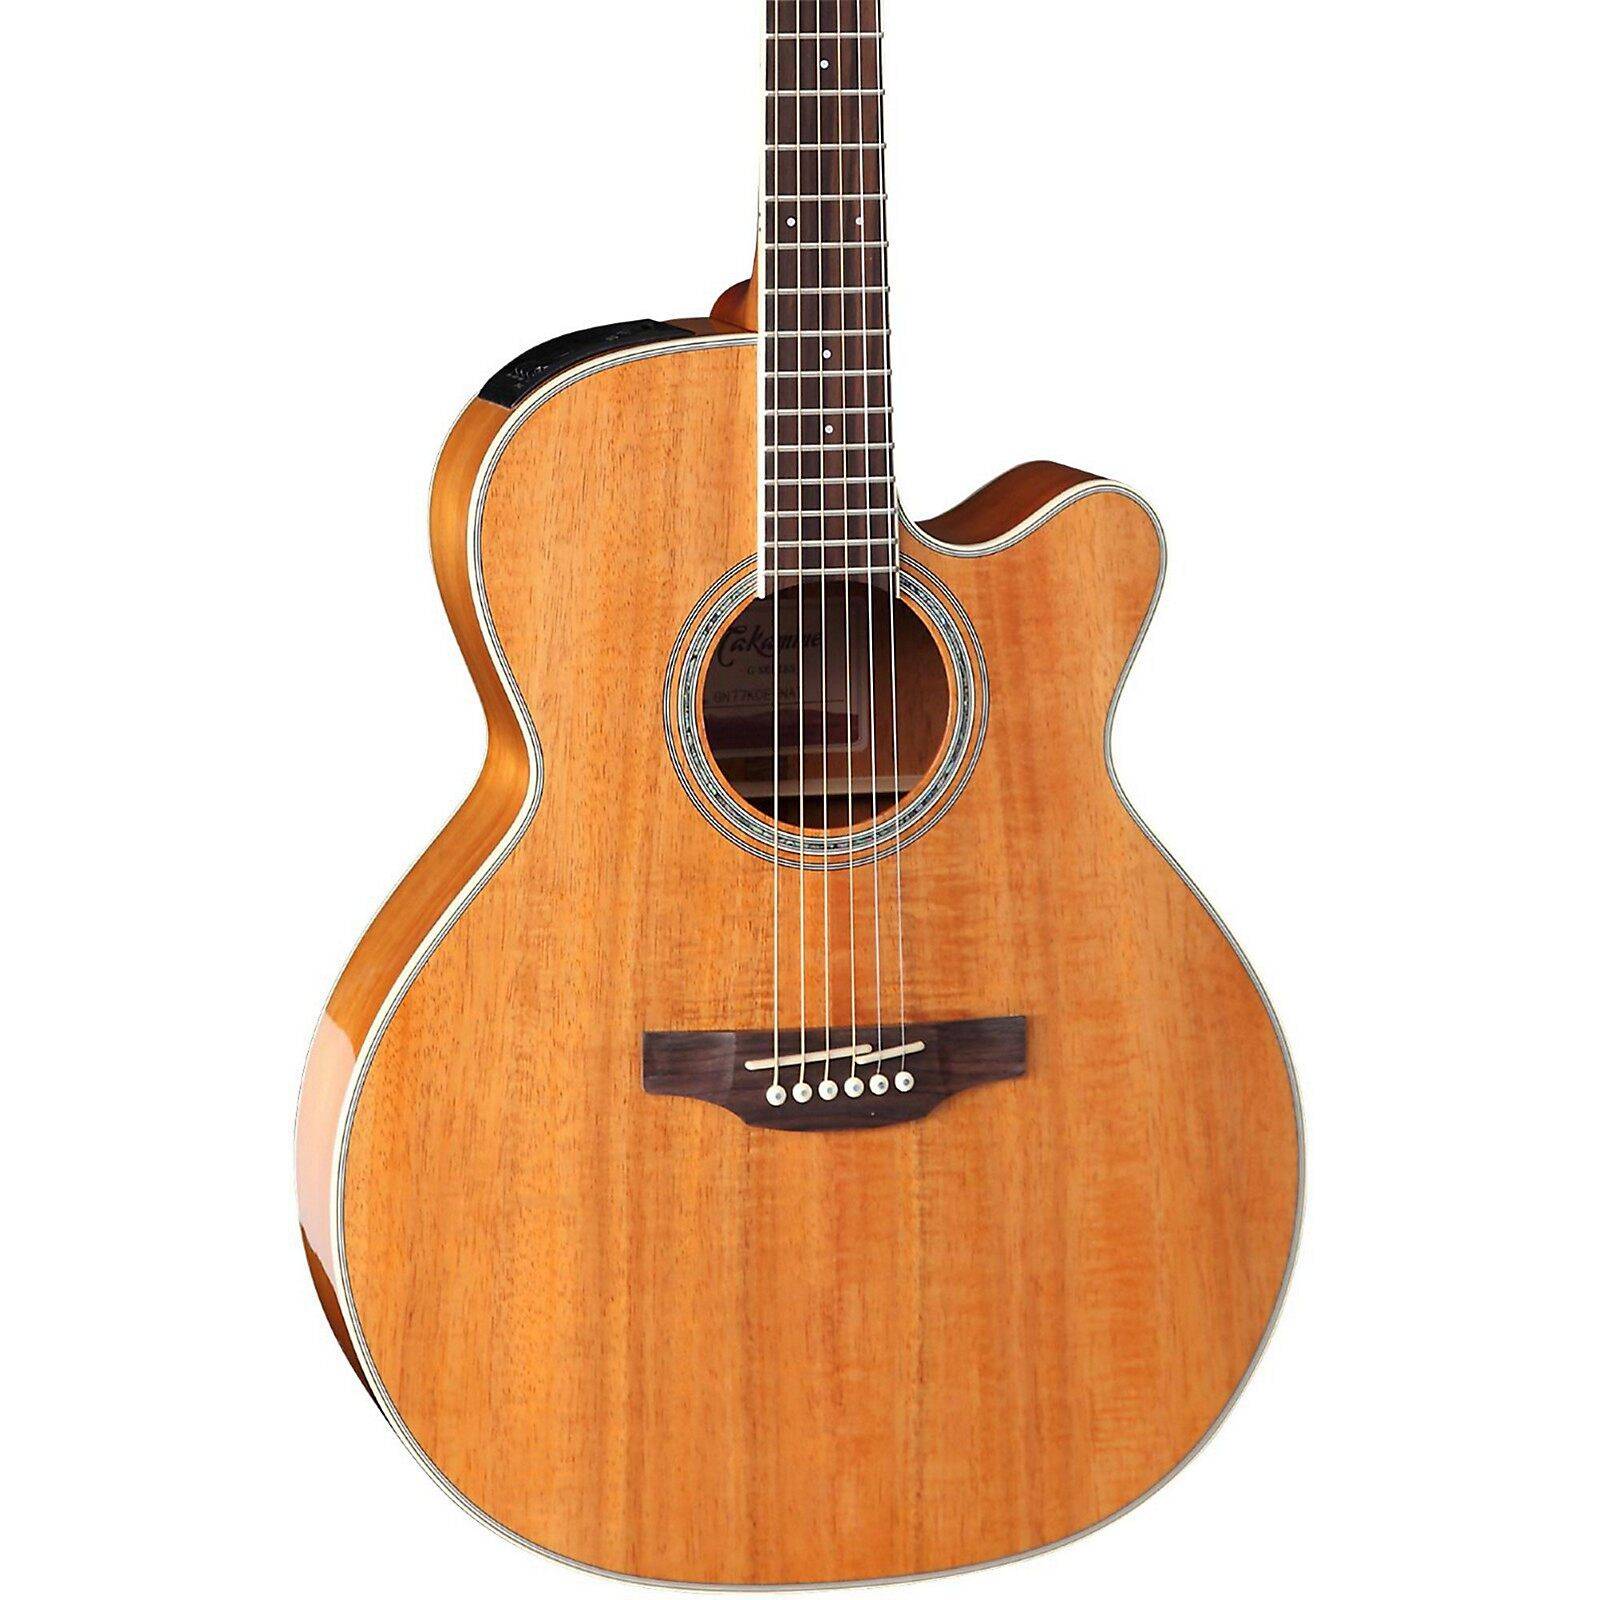 TAKAMINE GN77KCE NAT KOAWOOD CUTAWAY NEX BODY ACOUSTIC-ELECTRIC, TP-4TD PREAMP